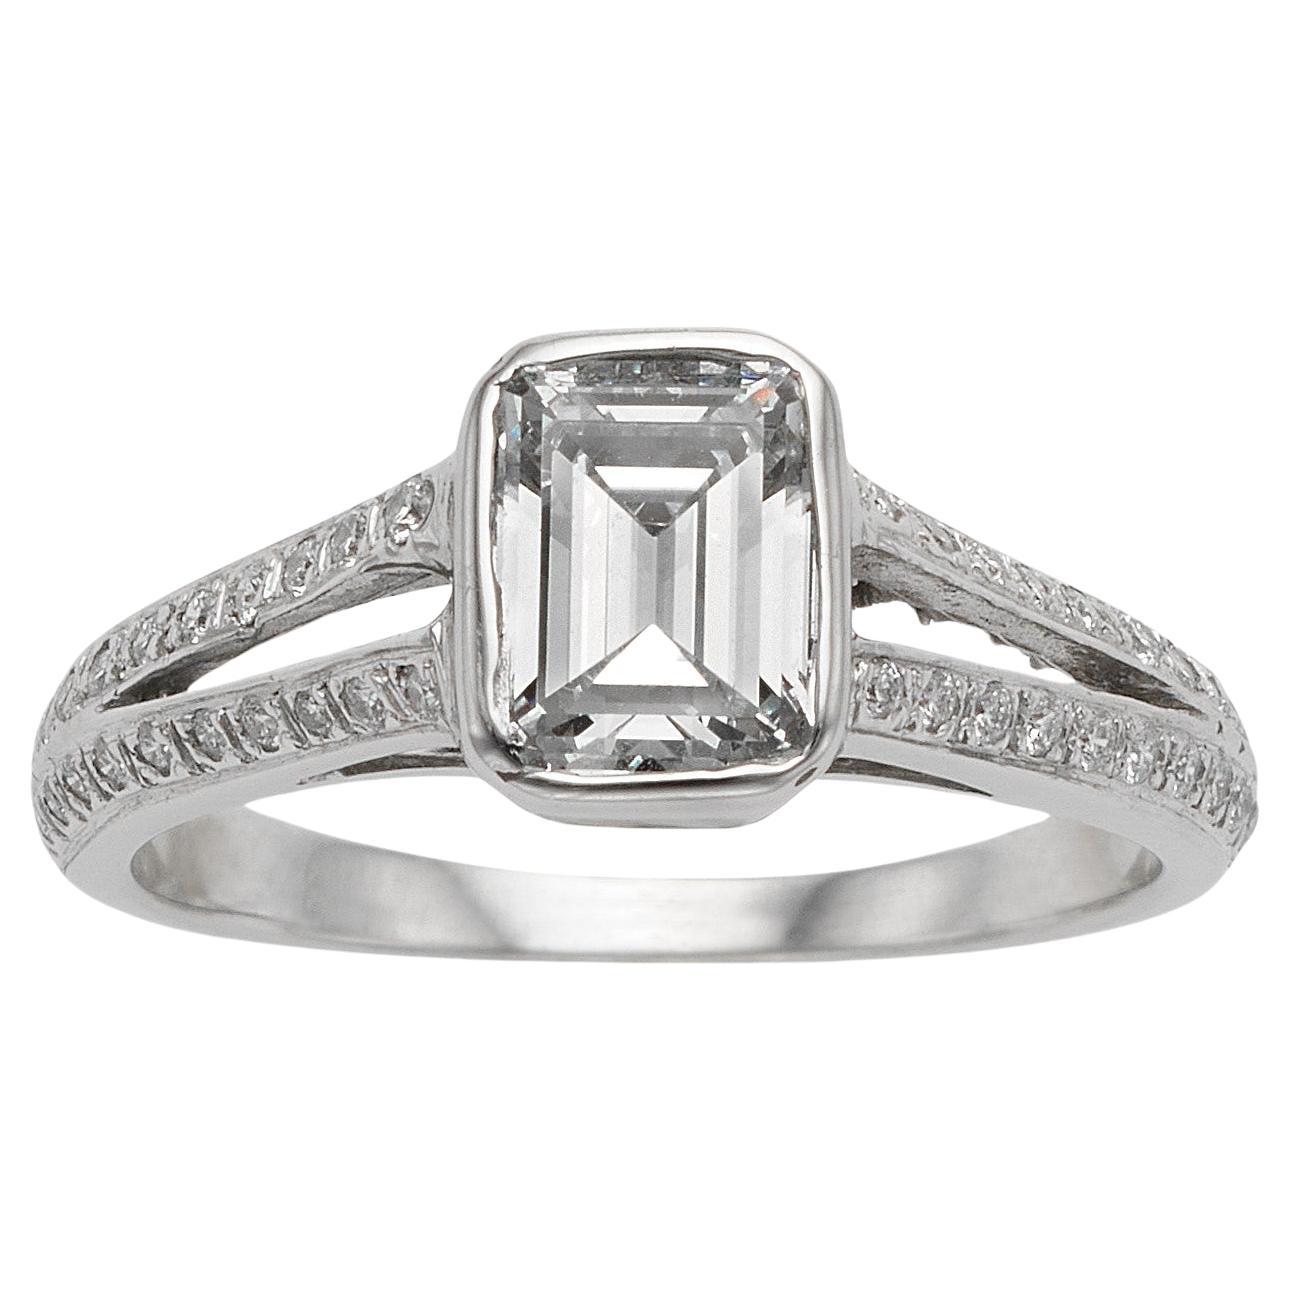 White Gold 1 CT Diamond Engagement Ring For Sale